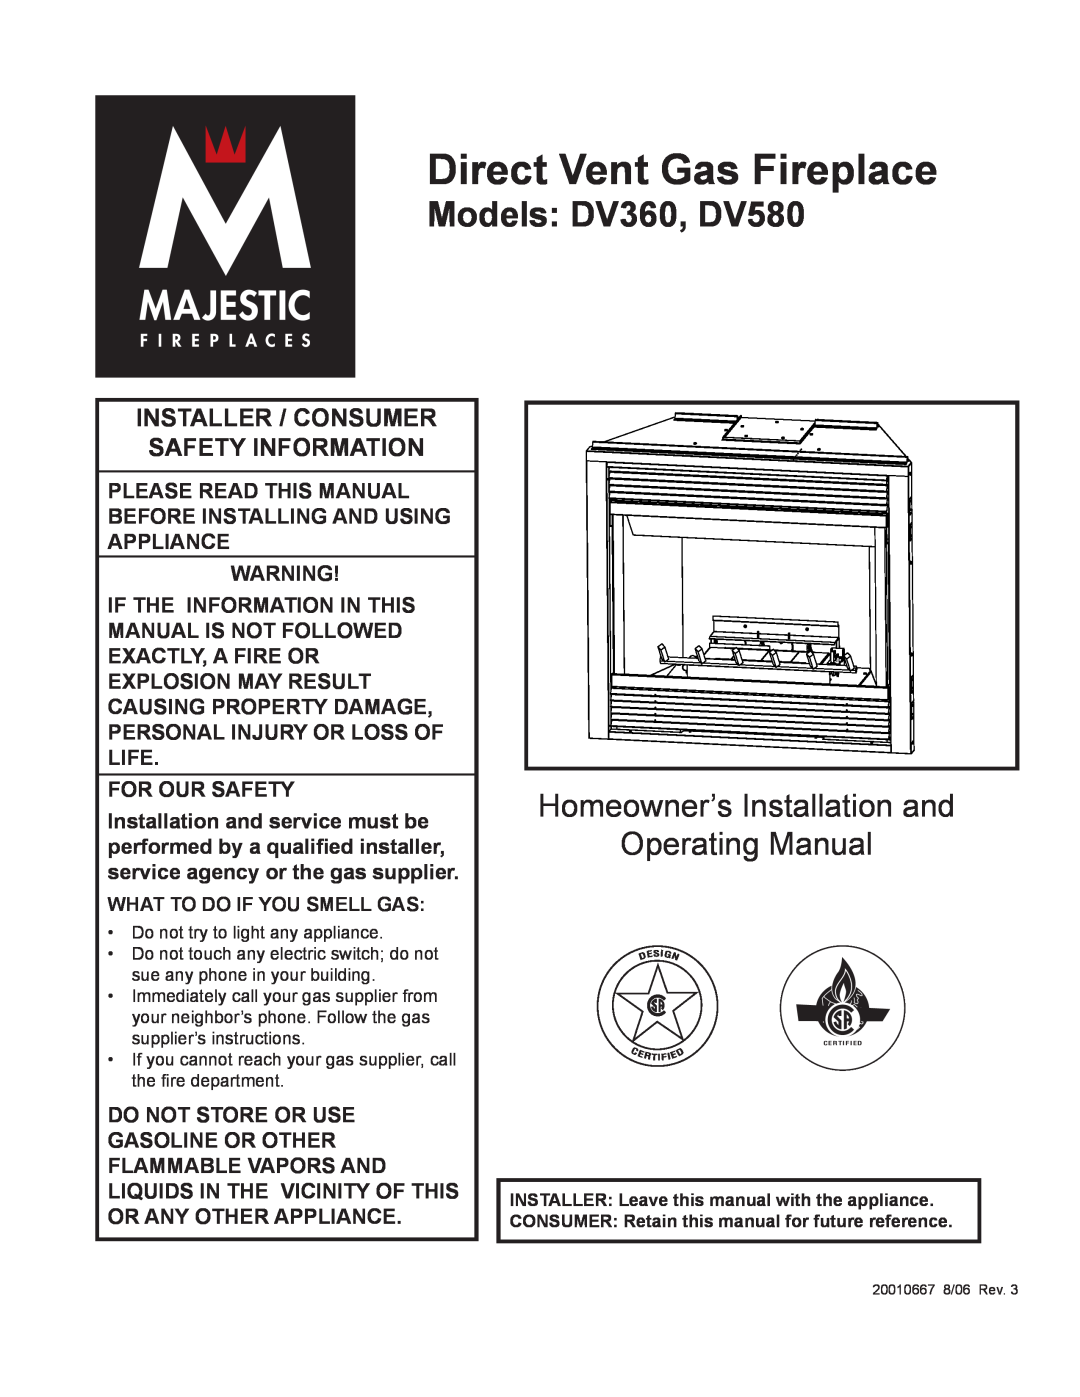 Vermont Casting manual Direct Vent Gas Fireplace, Models DV360, DV580, Homeowner’s Installation and Operating Manual 